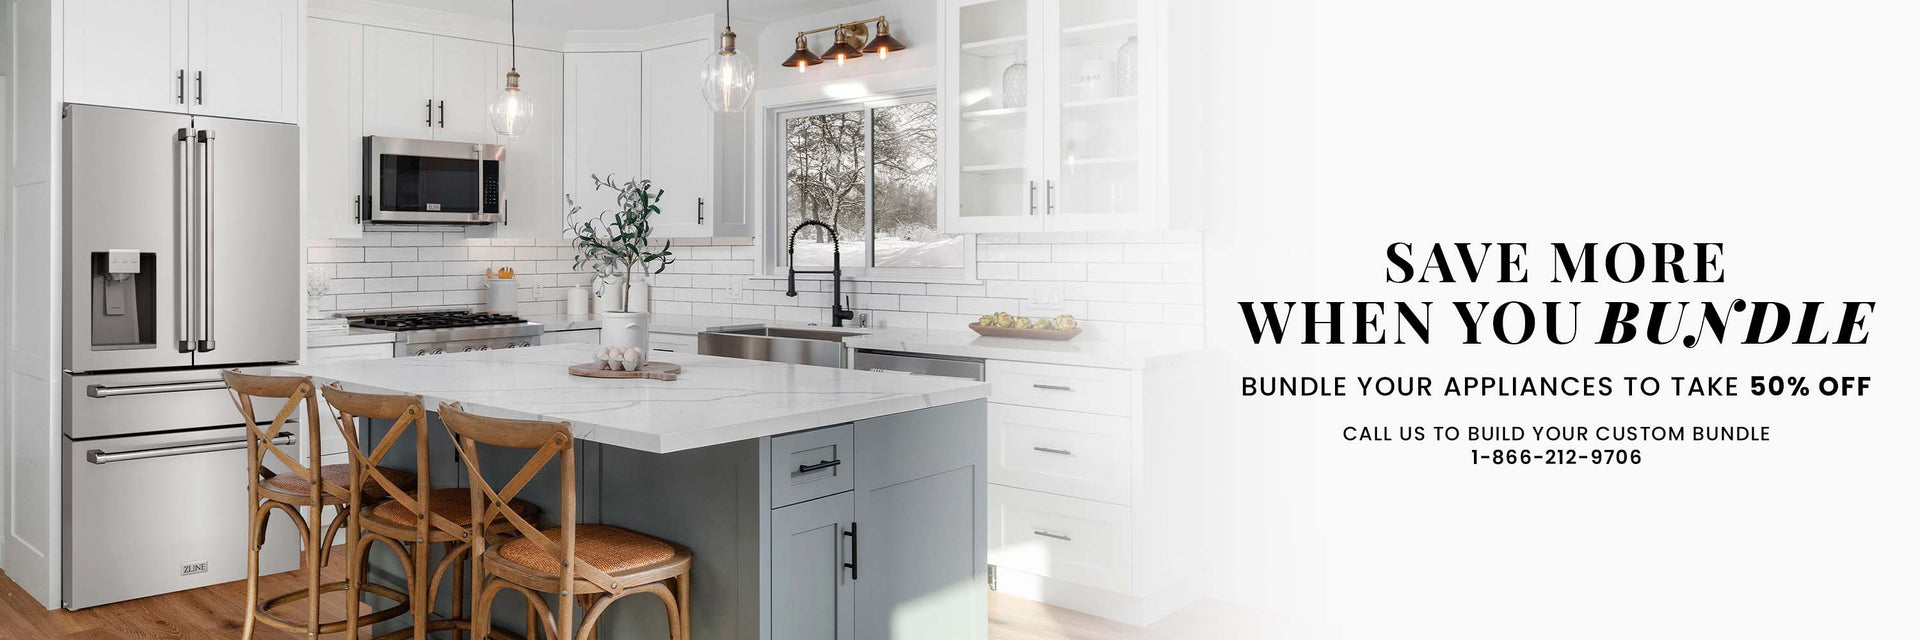 Kitchen appliances in cottage kitchen. Text: Save more when you bundle. Bundle your appliances to take 50% off. Call us to build your custom bundle.